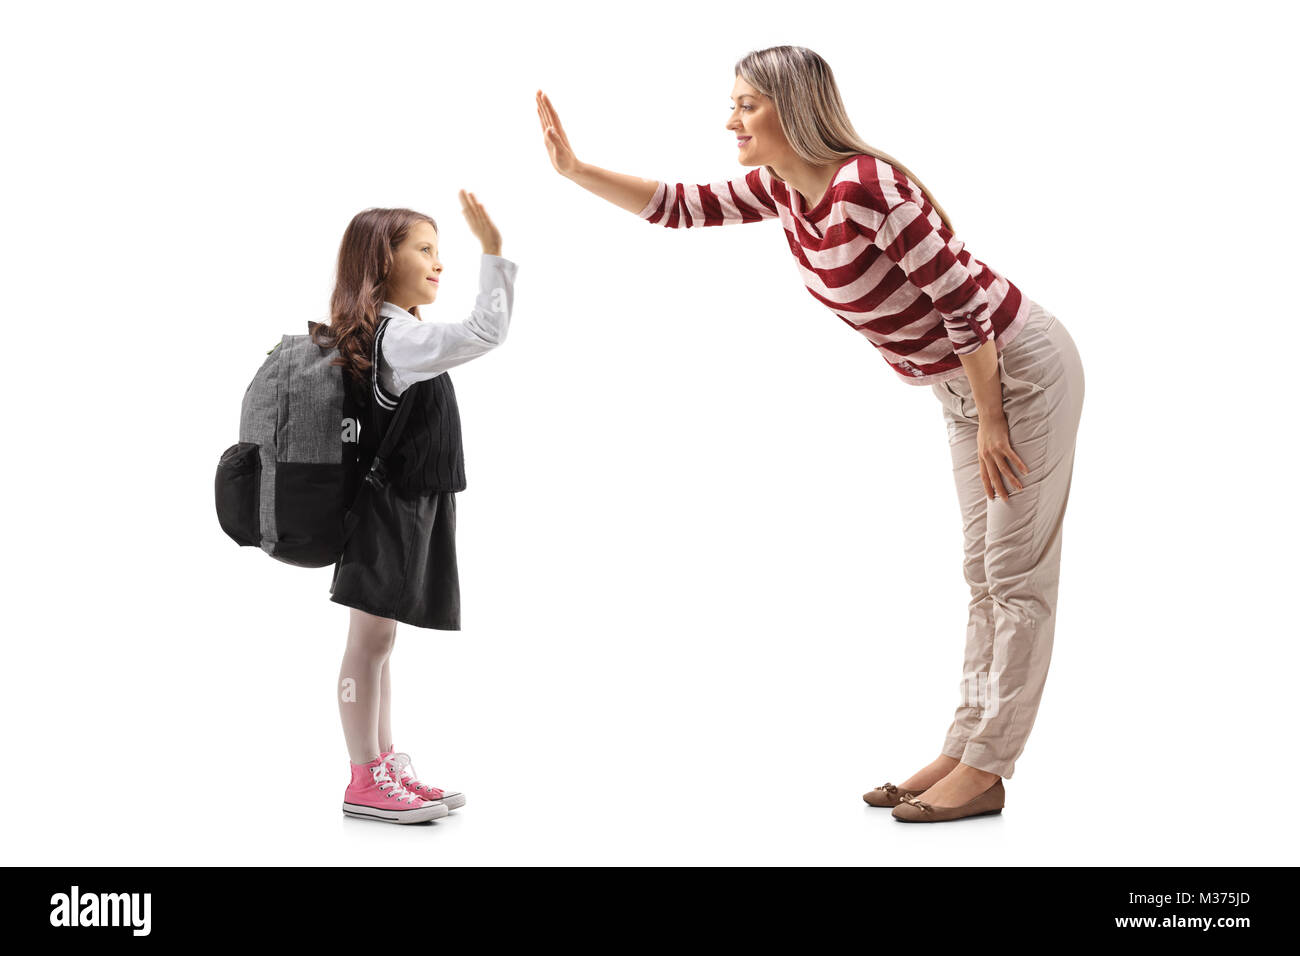 Full length profile shot of a little schoolgirl high-fiving with a young woman isolated on white background Stock Photo